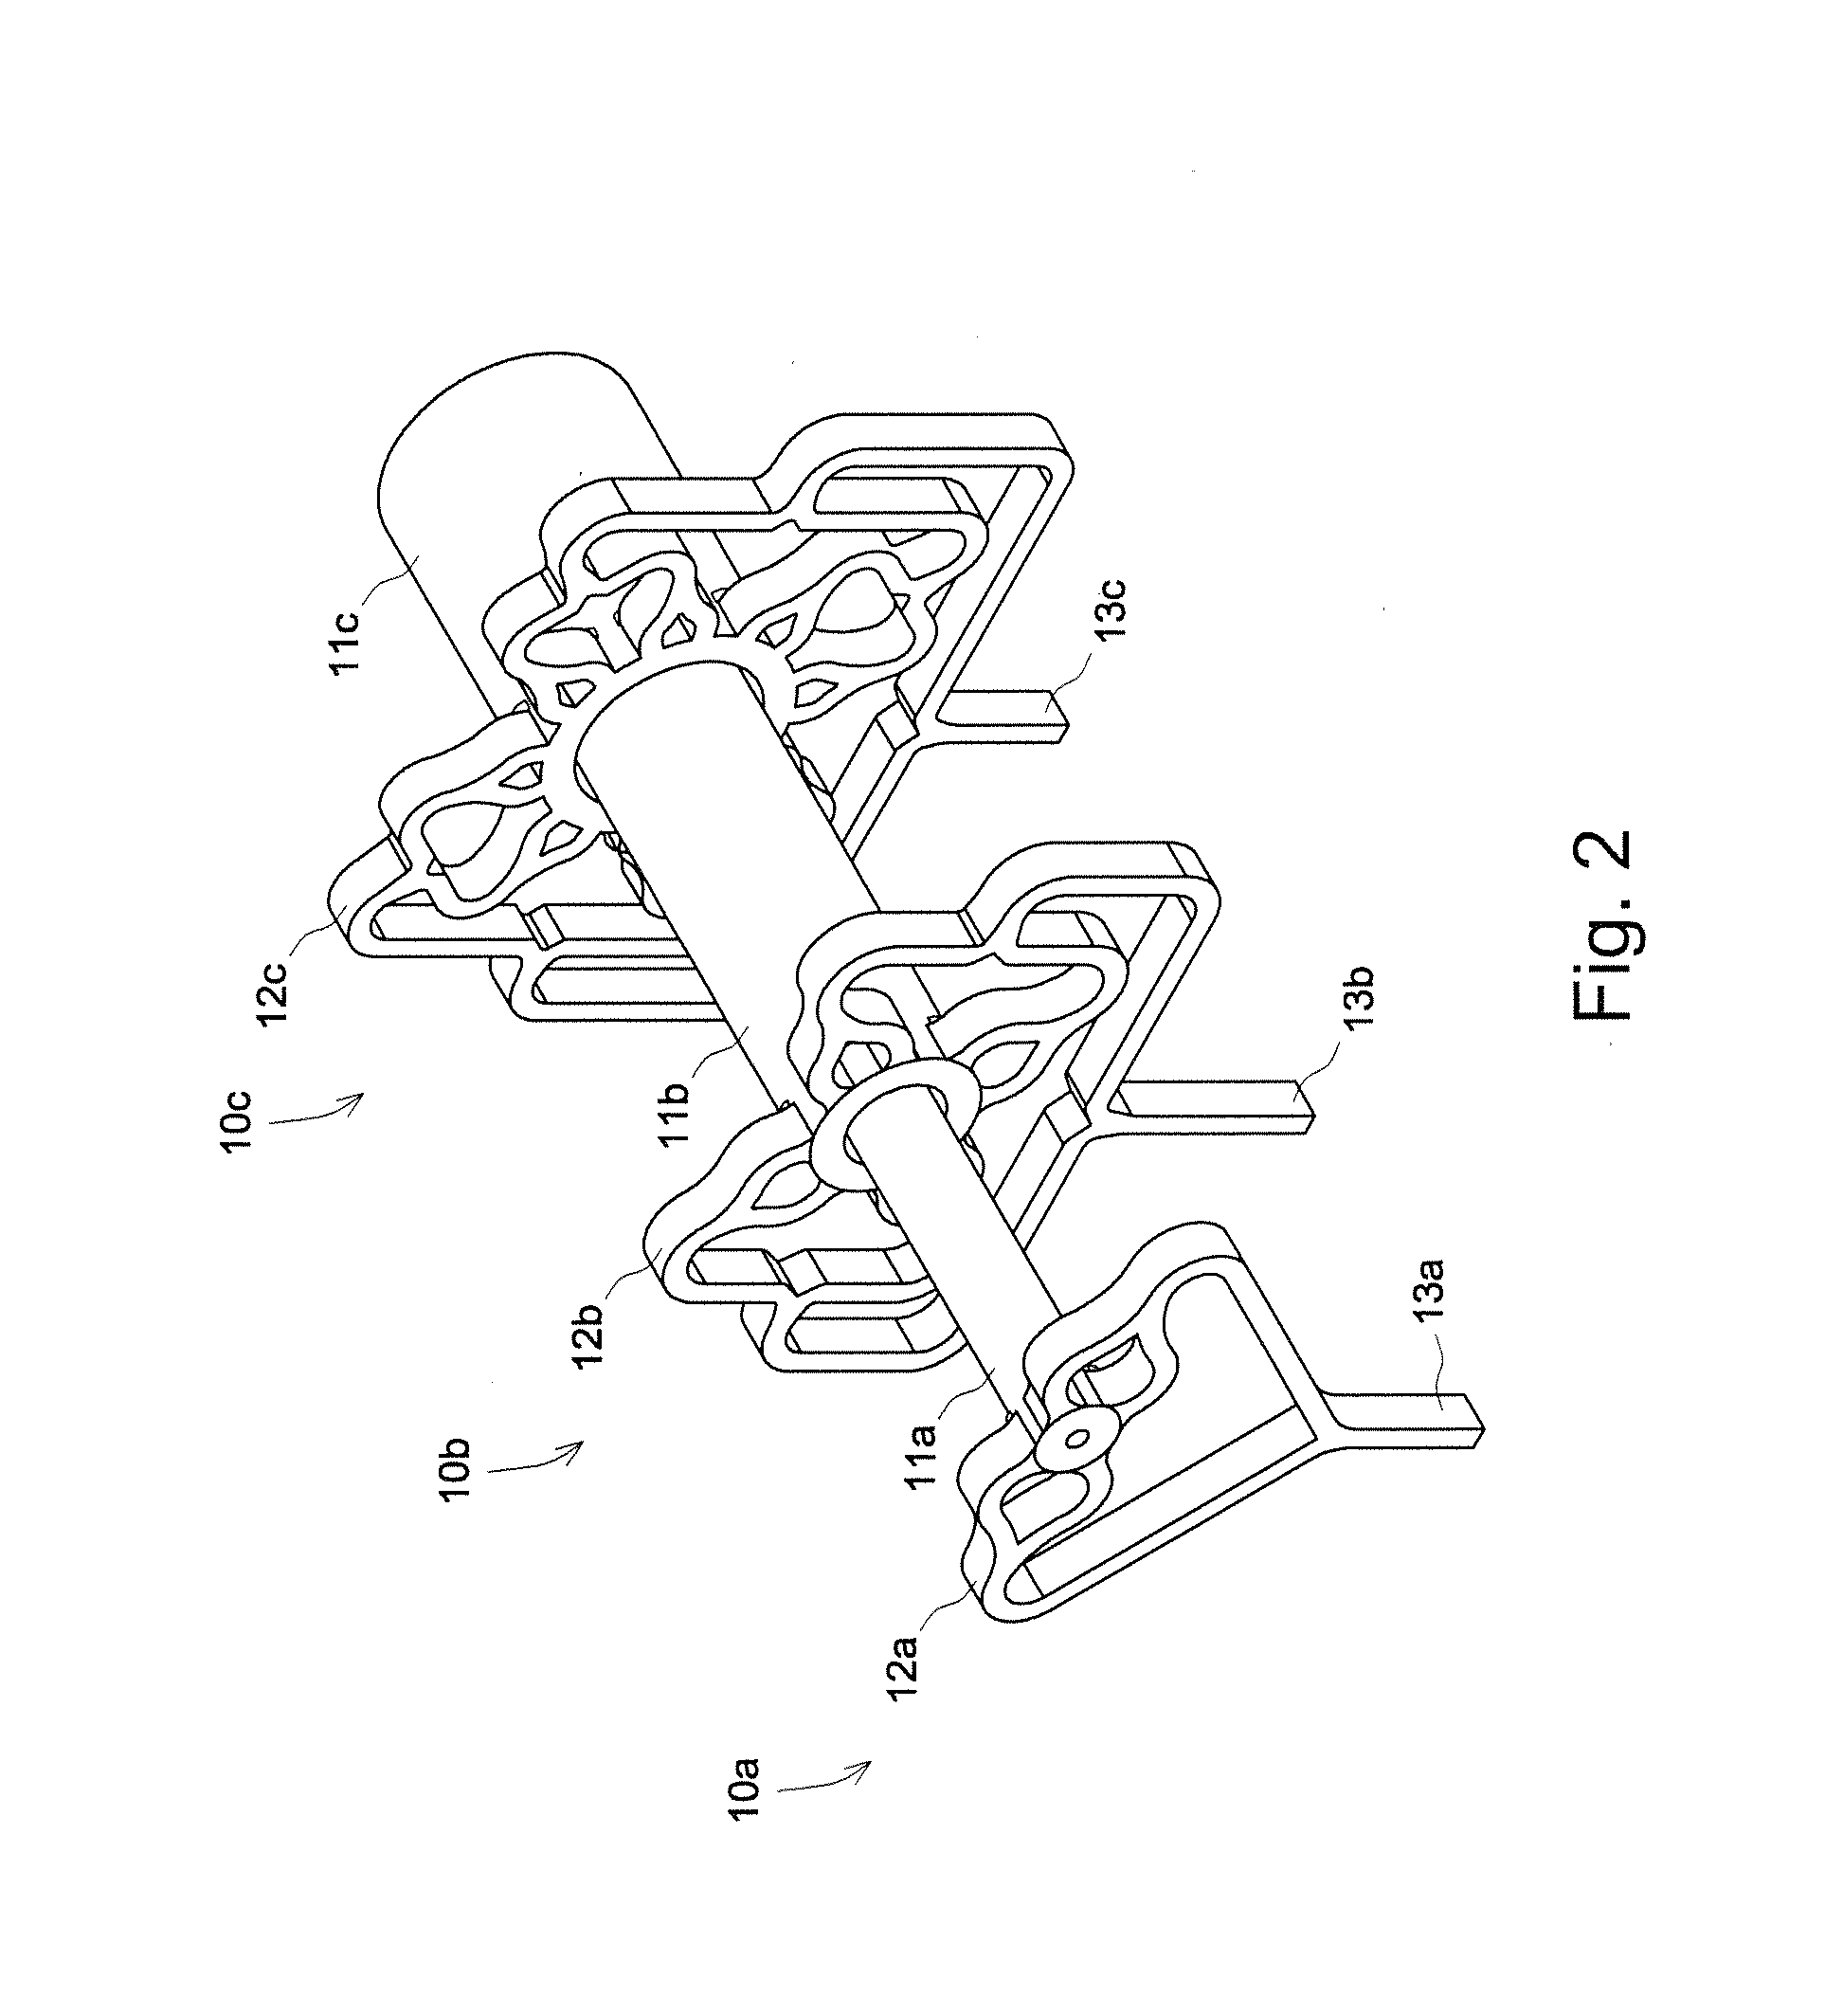 Multi-channel mode converter and rotary joint operating with a series of te or tm mode electromagnetic wave